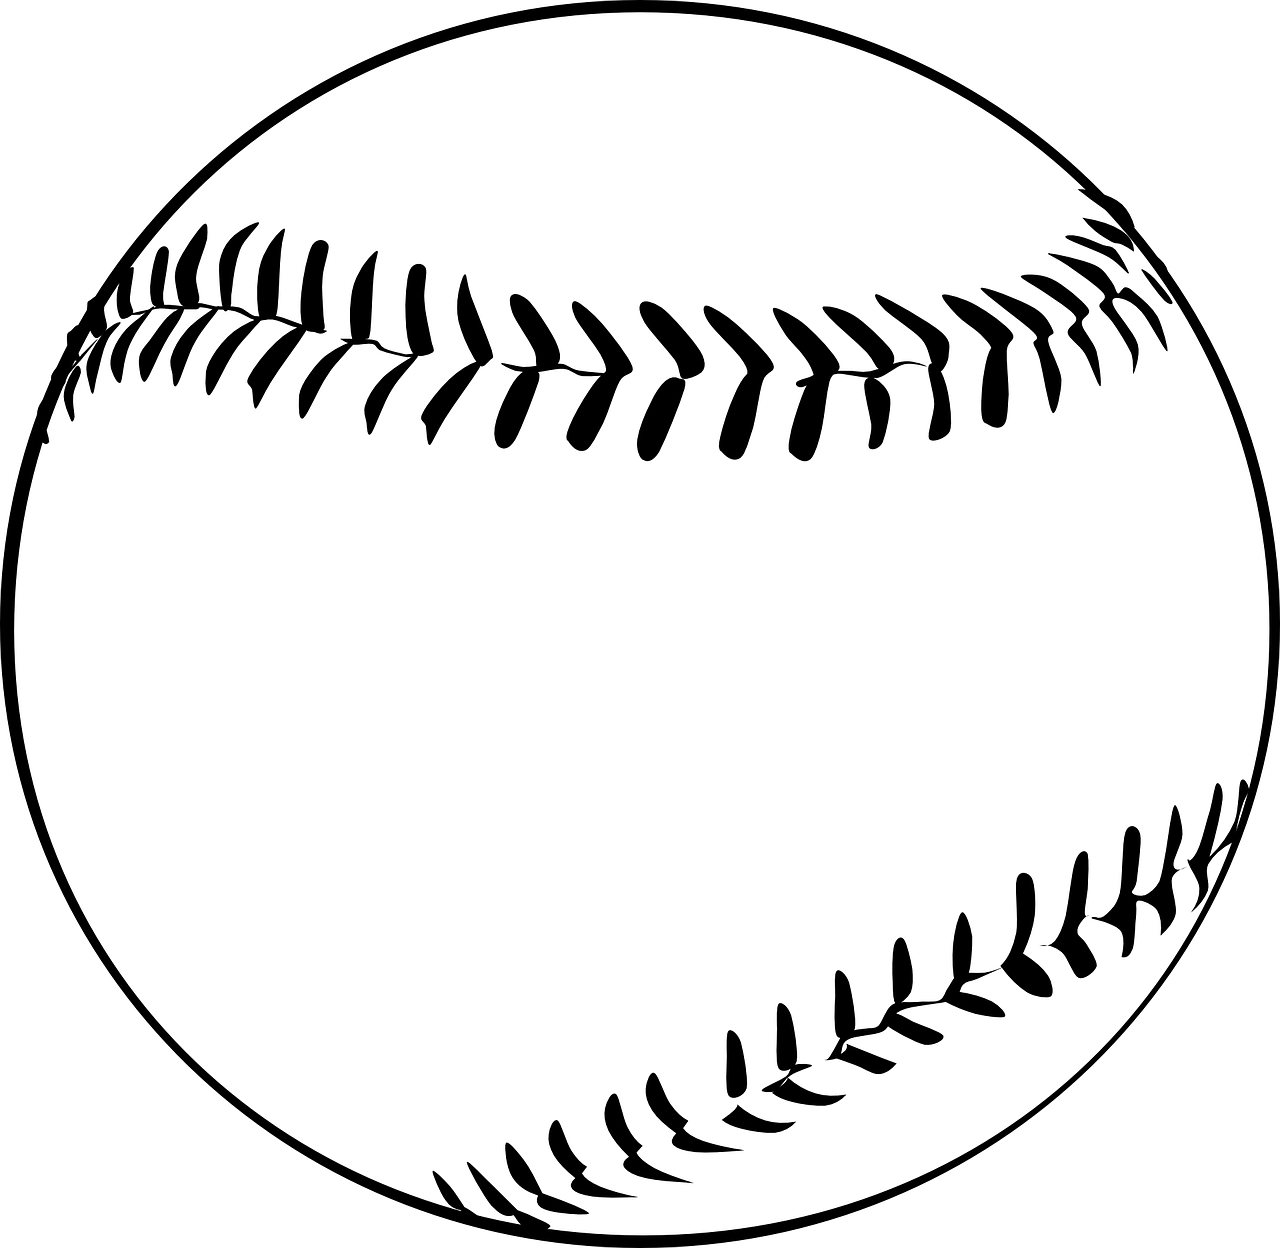 baseball,ball,softball,sport,leather,batting,free vector graphics,free pictures, free photos, free images, royalty free, free illustrations, public domain